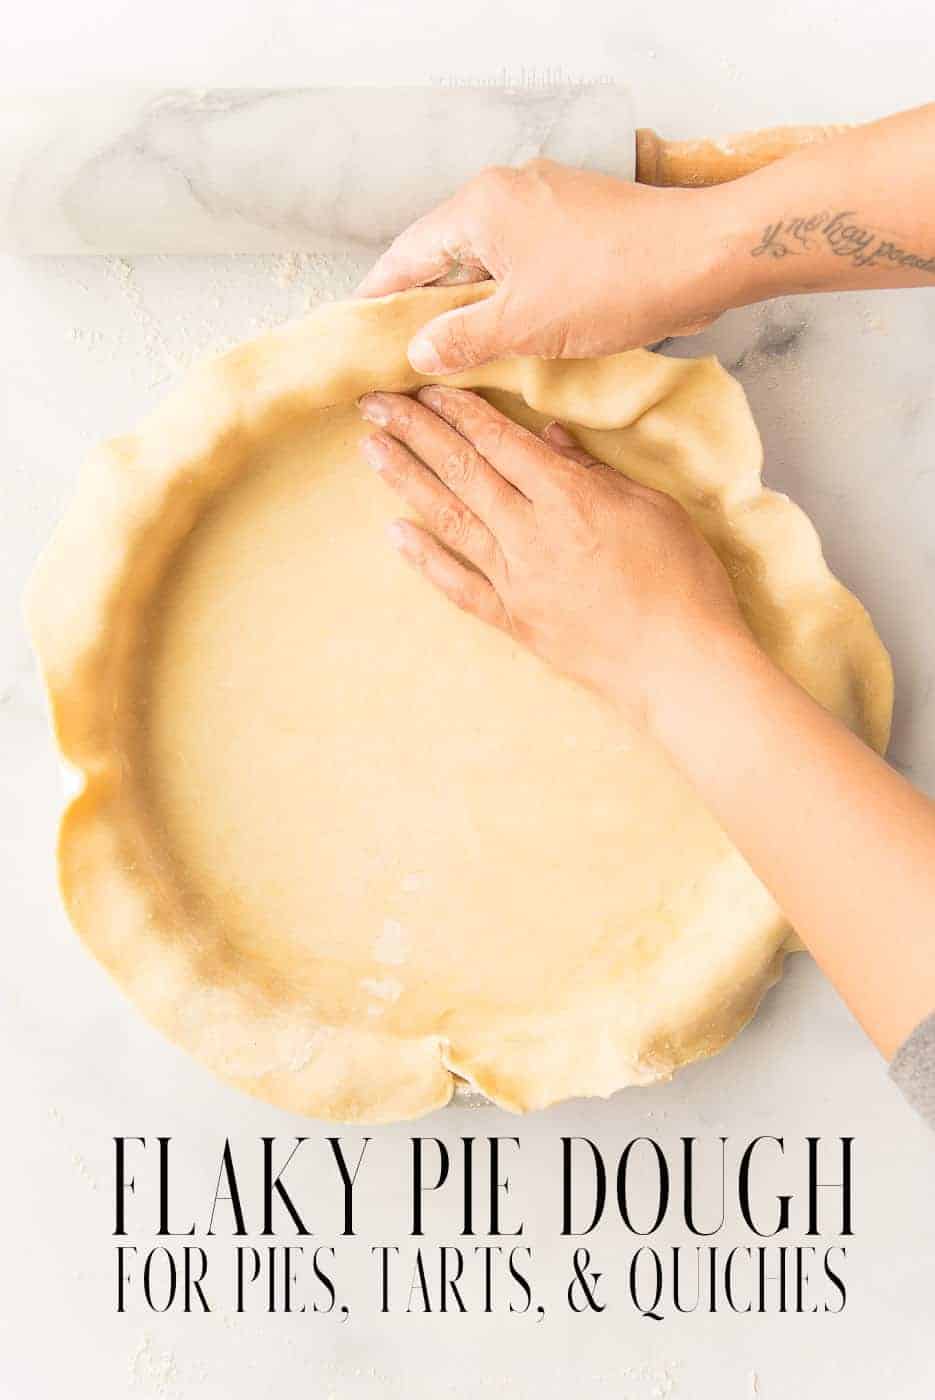 Flaky pie dough is easier to makes at home than you may think. Use this buttery dough for all of your pie, tarts, or quiche recipes. #piedough #pierecipe #tartdough #quichedough #baking #pie #tarts #pastelillos #empanadillas #quiche #quichelorraine #makingpies #holidaypie #piedoughrecipe #recipeforpiedough #butterpiedough #flakypiedoughrecipe #recetasdepai #applepierecipe #quichelorraine #fruittart #bakingfundamentals #twocrustpiedoughrecipe via @ediblesense